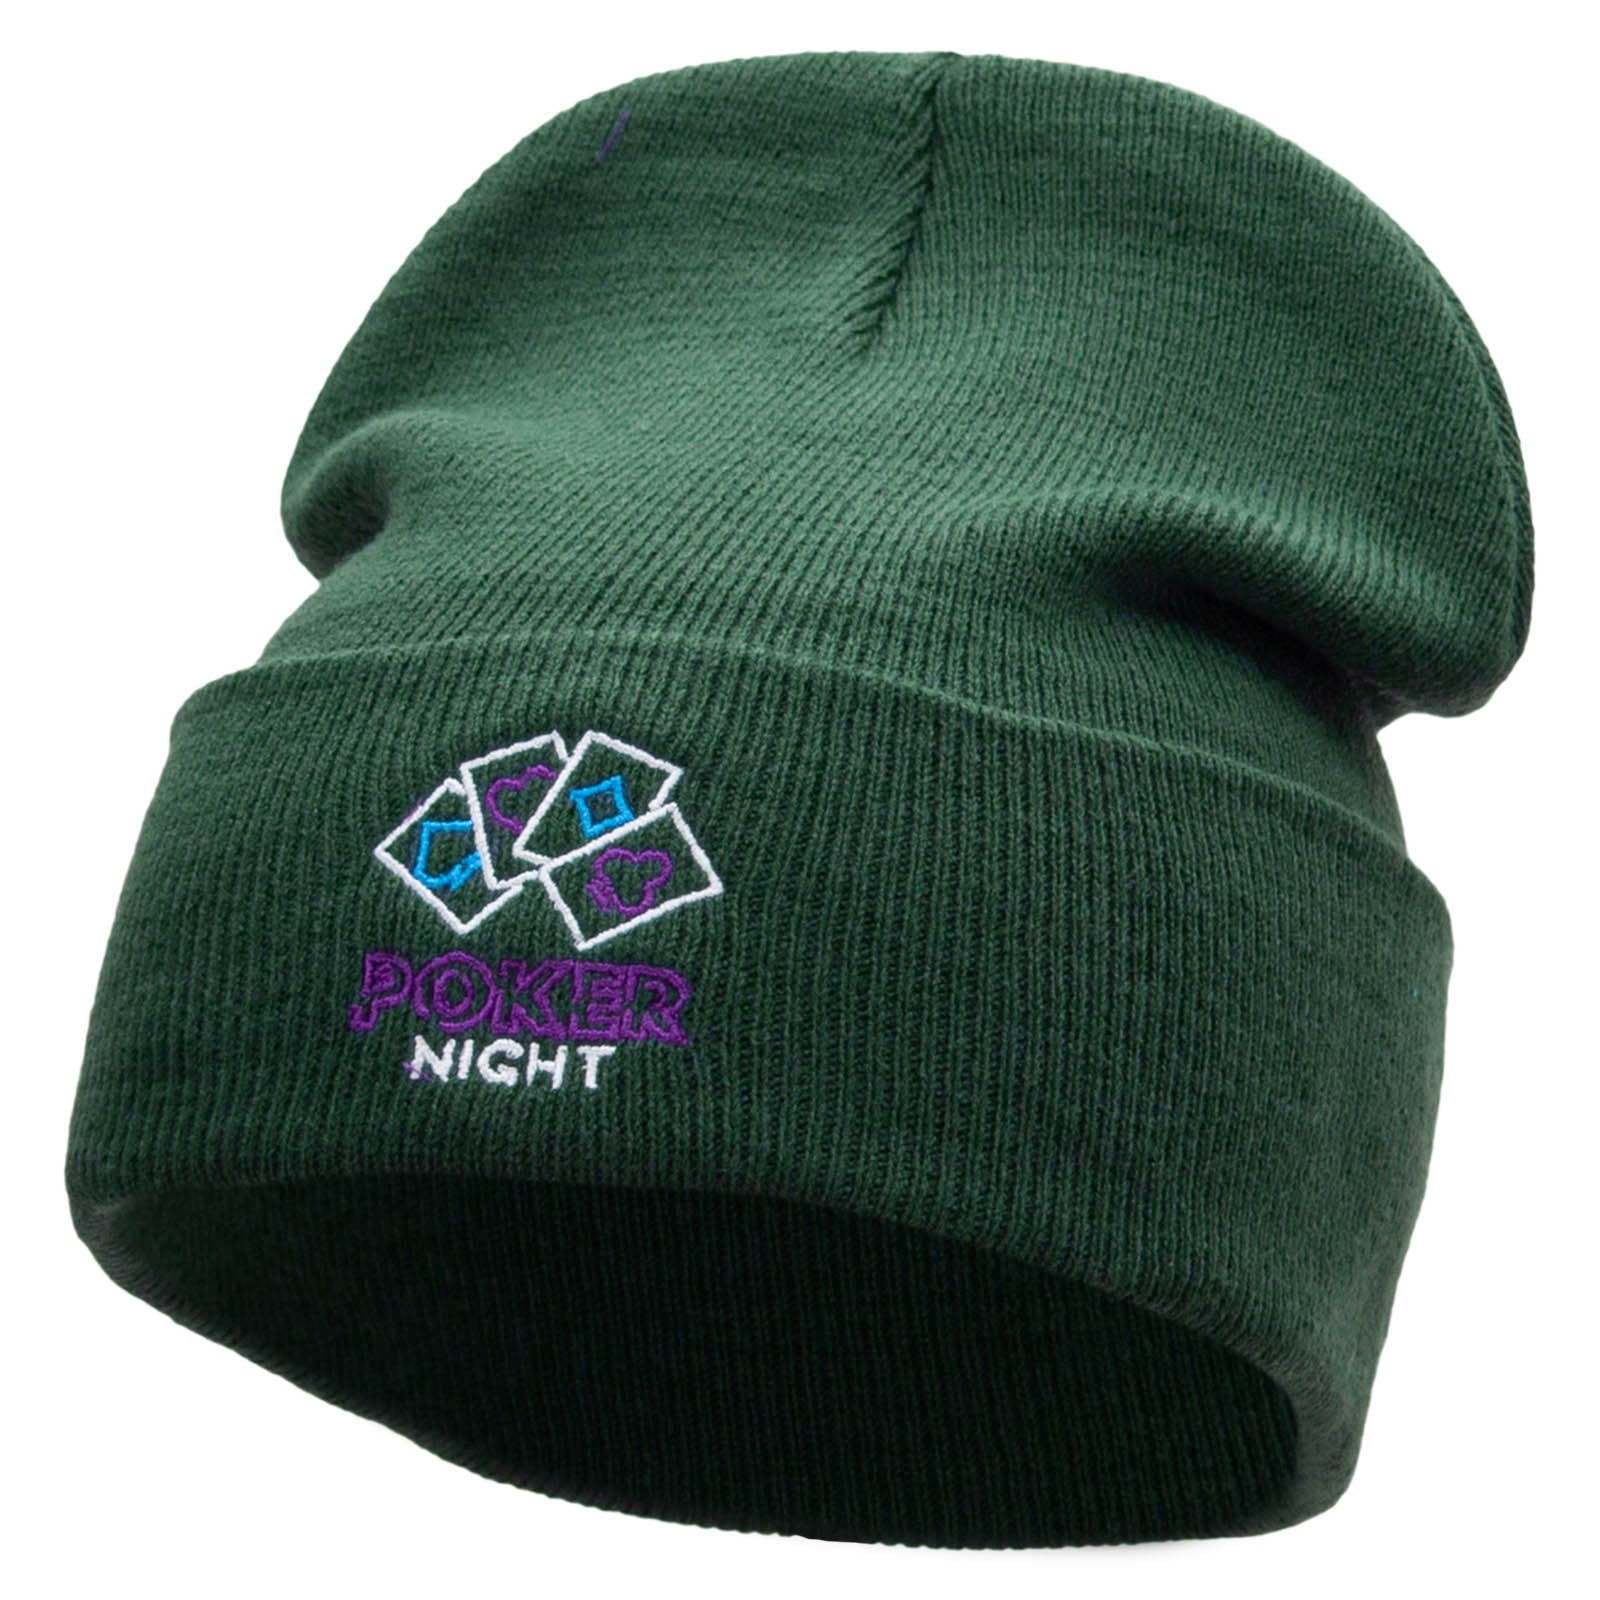 The Poker Night Embroidered 12 Inch Long Knitted Beanie - Dk Green OSFM